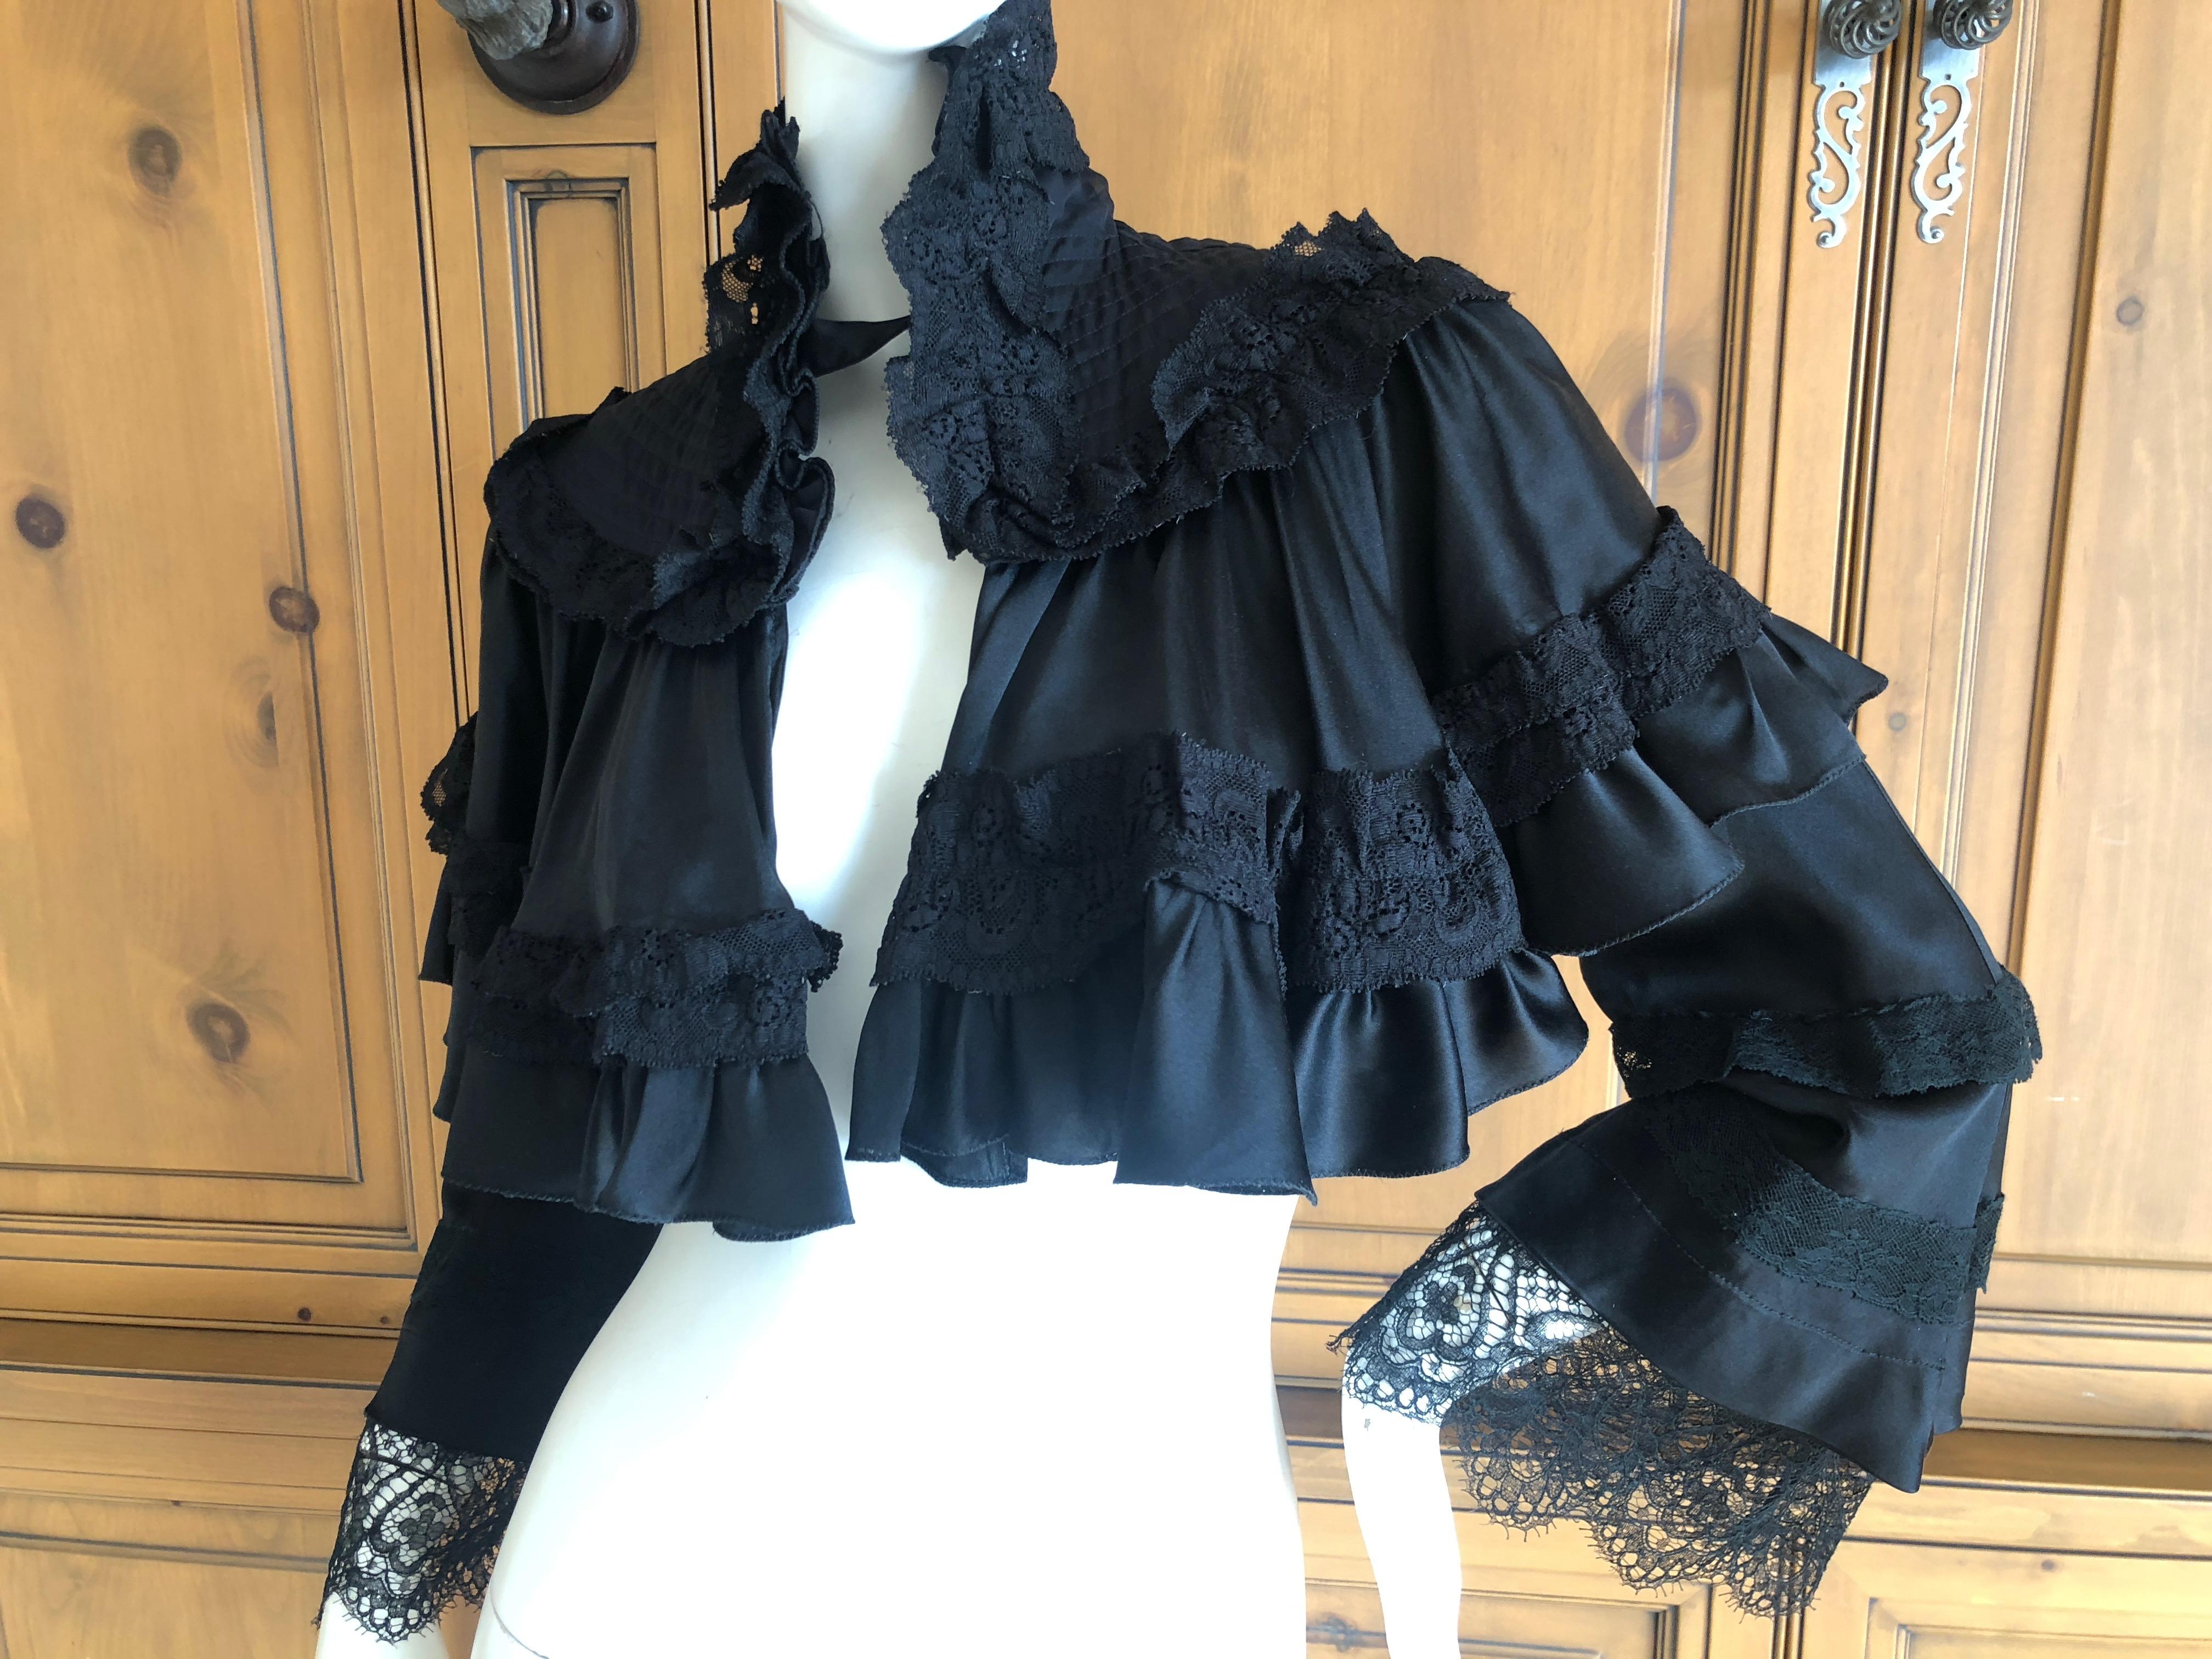 Roberto Cavalli for Just Cavalli Vintage Black Silk Victorian Style Cape Jacket.
This is so pretty, please use zoom feature to see details
Size 38
Bust 36